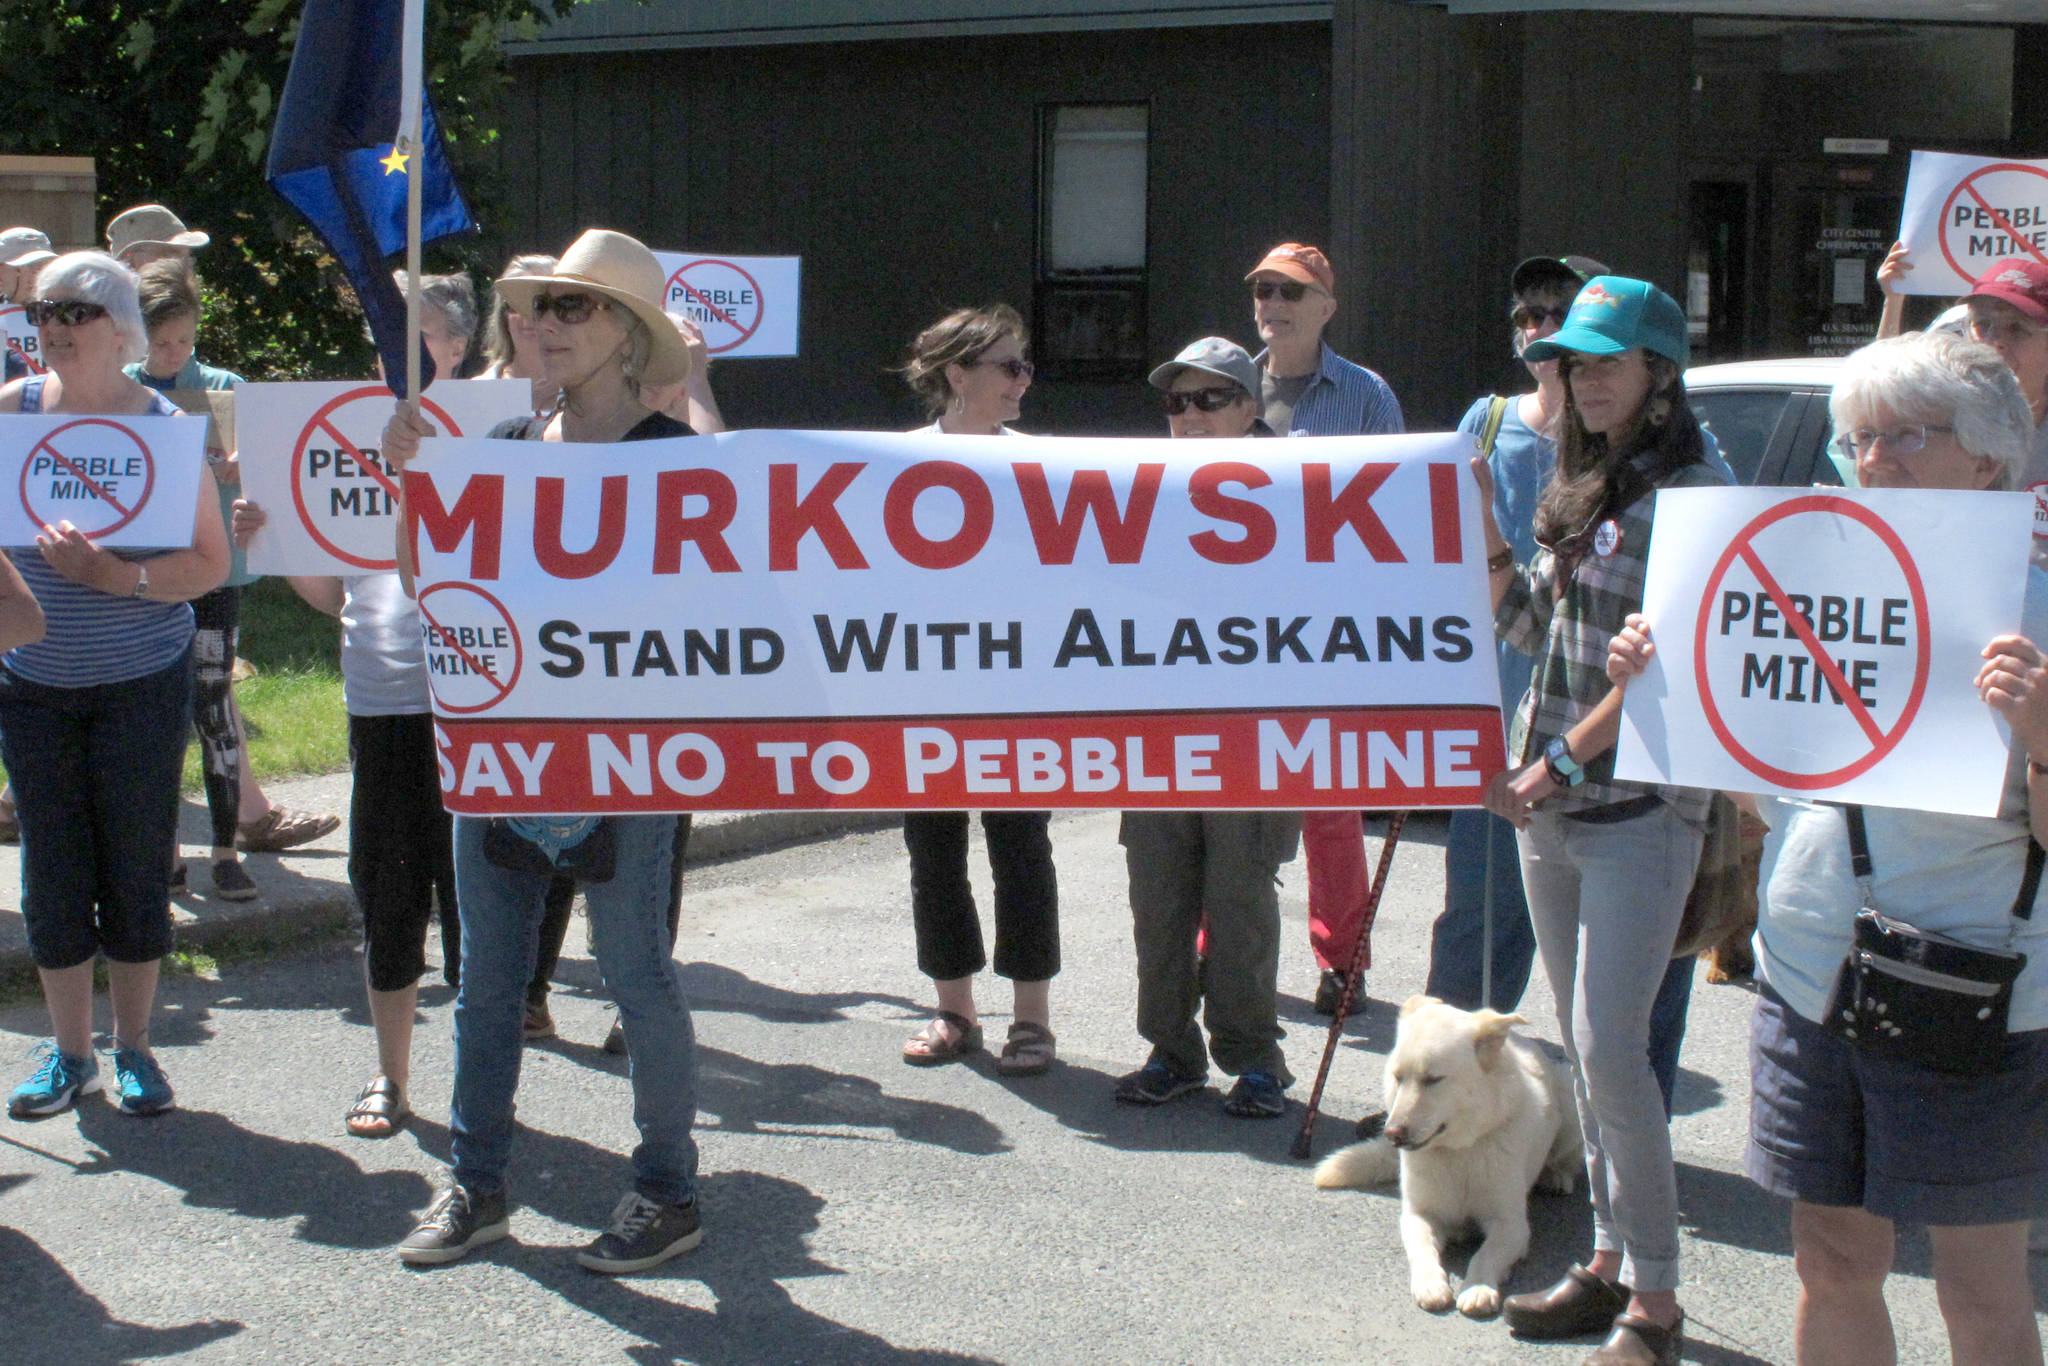 In this June 2019 photo, people gather outside U.S. Sen. Lisa Murkowski’s office in Juneau, Alaska, to protest the proposed Pebble Mine. The Pebble Limited Partnership, which wants to build a copper and gold mine near the headwaters of a major U.S. salmon fishery in southwest Alaska, says it plans to offer residents in the region a dividend. (AP Photo/Becky Bohrer, File)